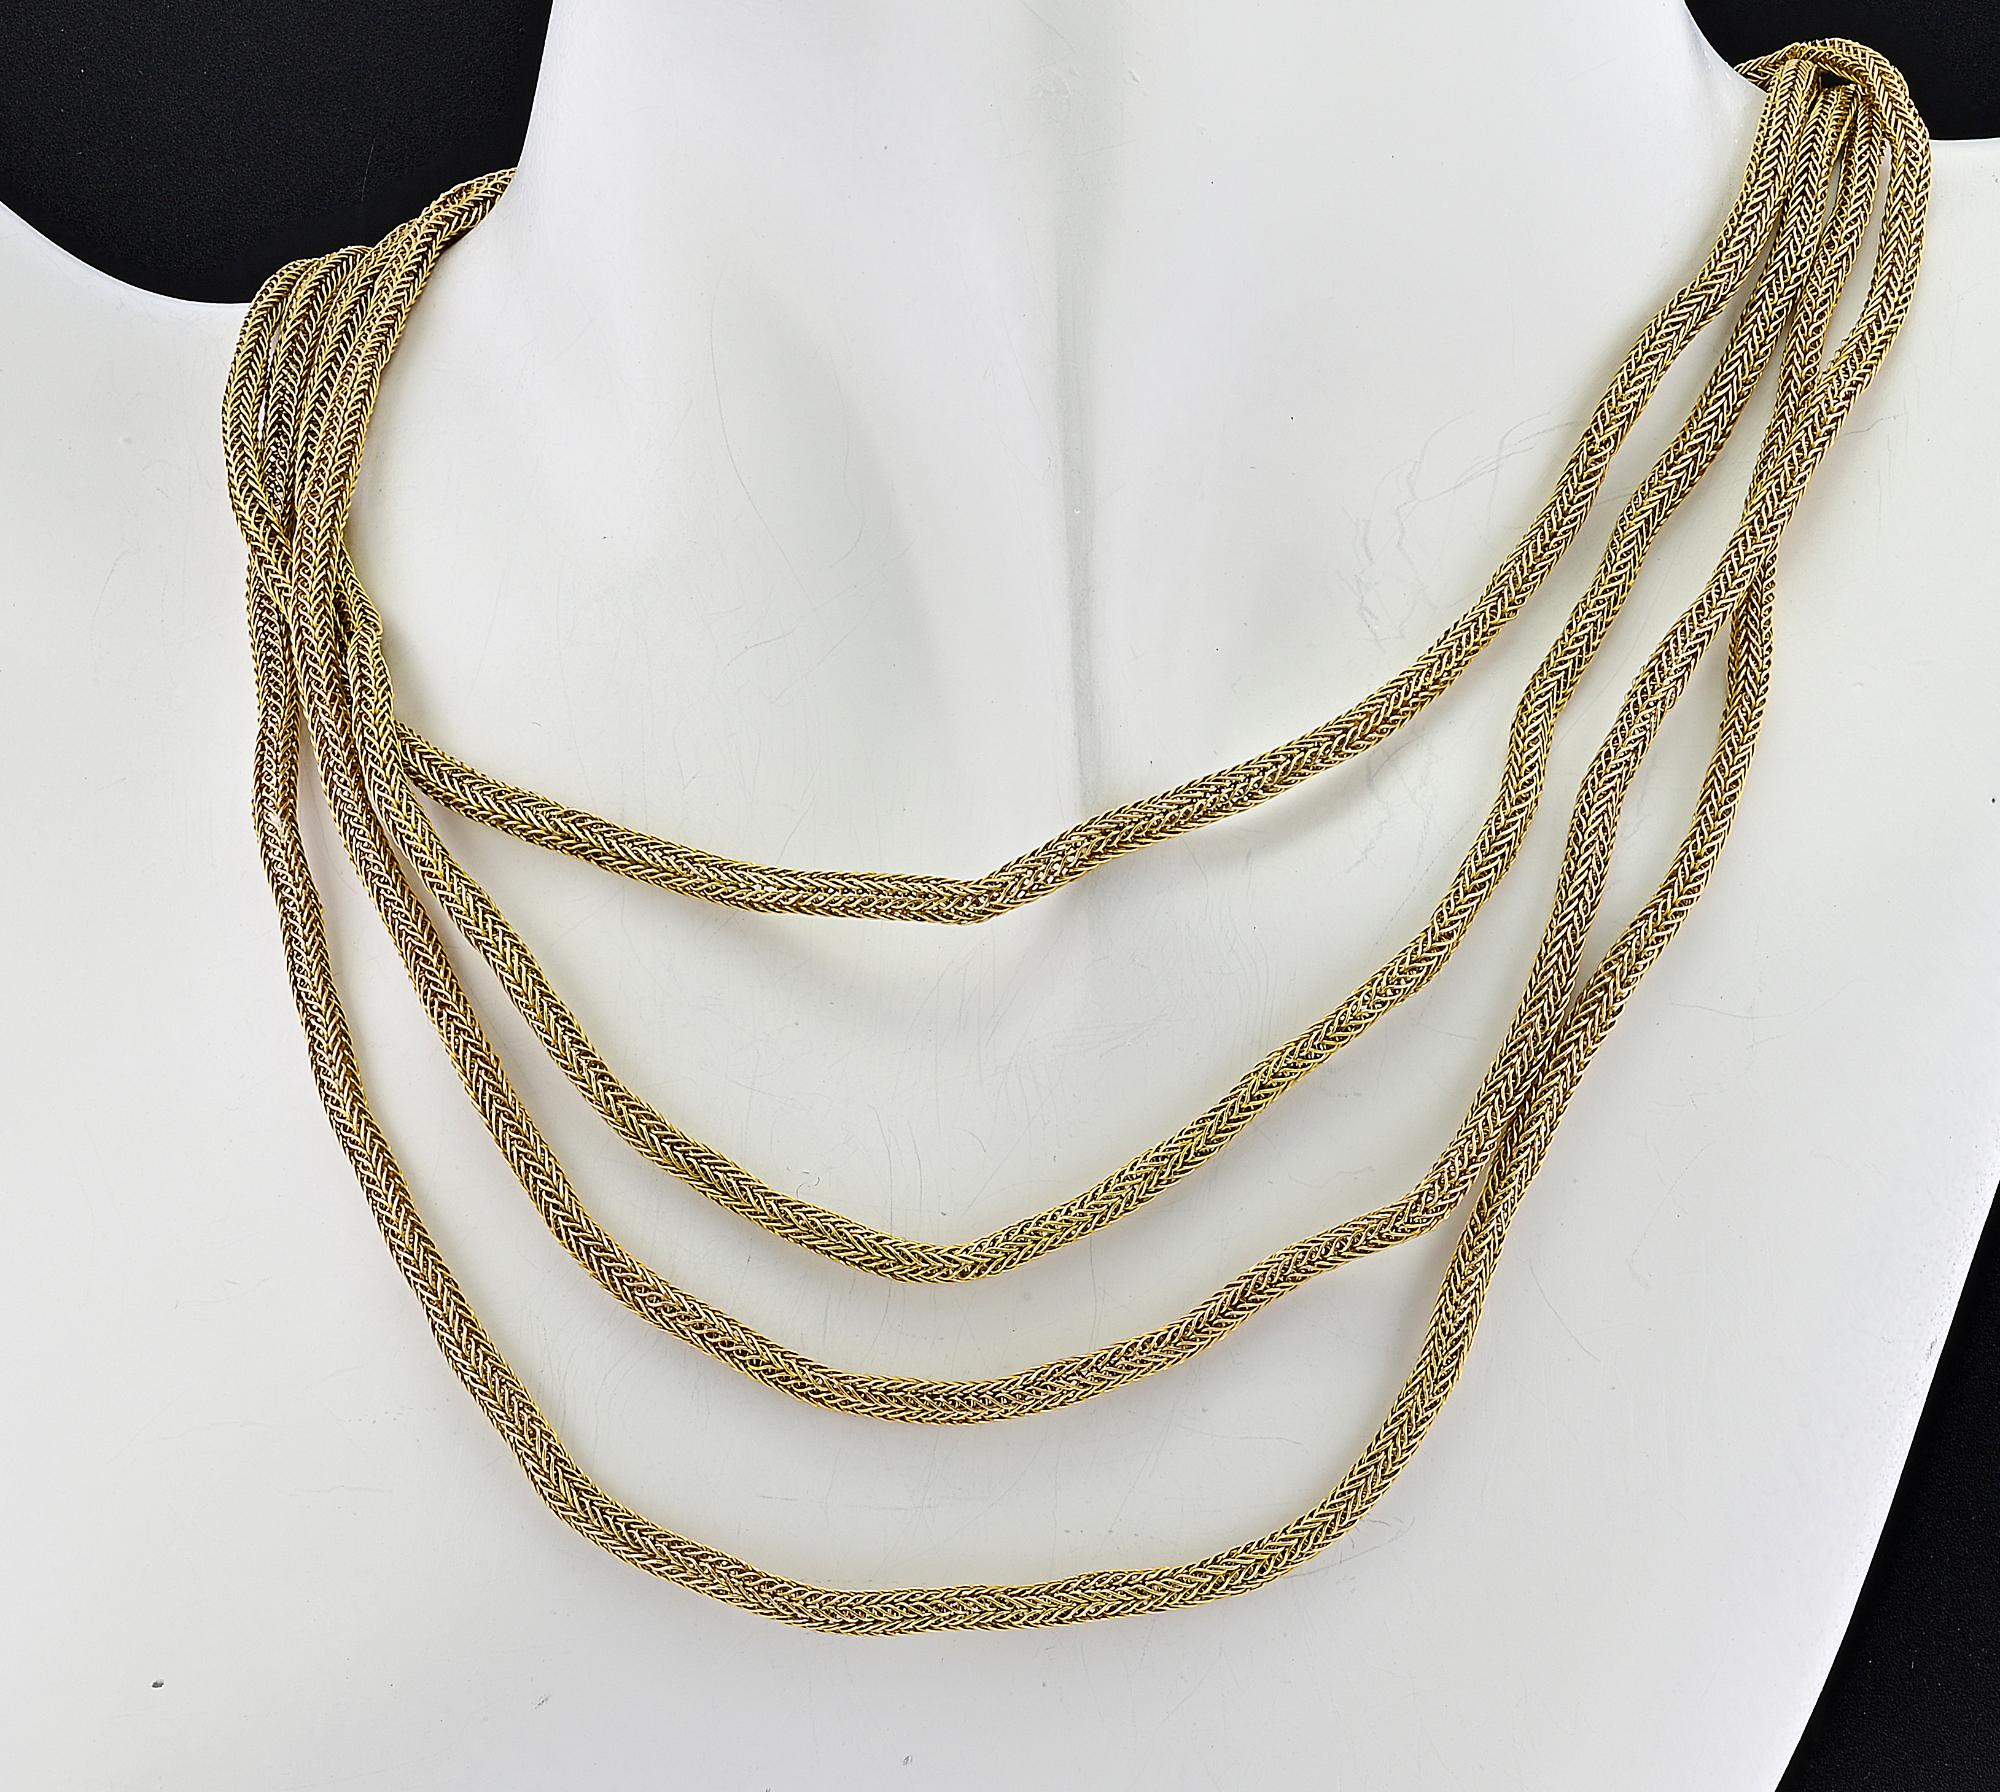 This superb antique Georgian period chain is 1830 circa
Rare example of hand knitted work made by solid 9KT yellow gold threads, beautiful workmanship, very different from all others, weight is 24.1 grams
The necklace is 67.7 inches in length and